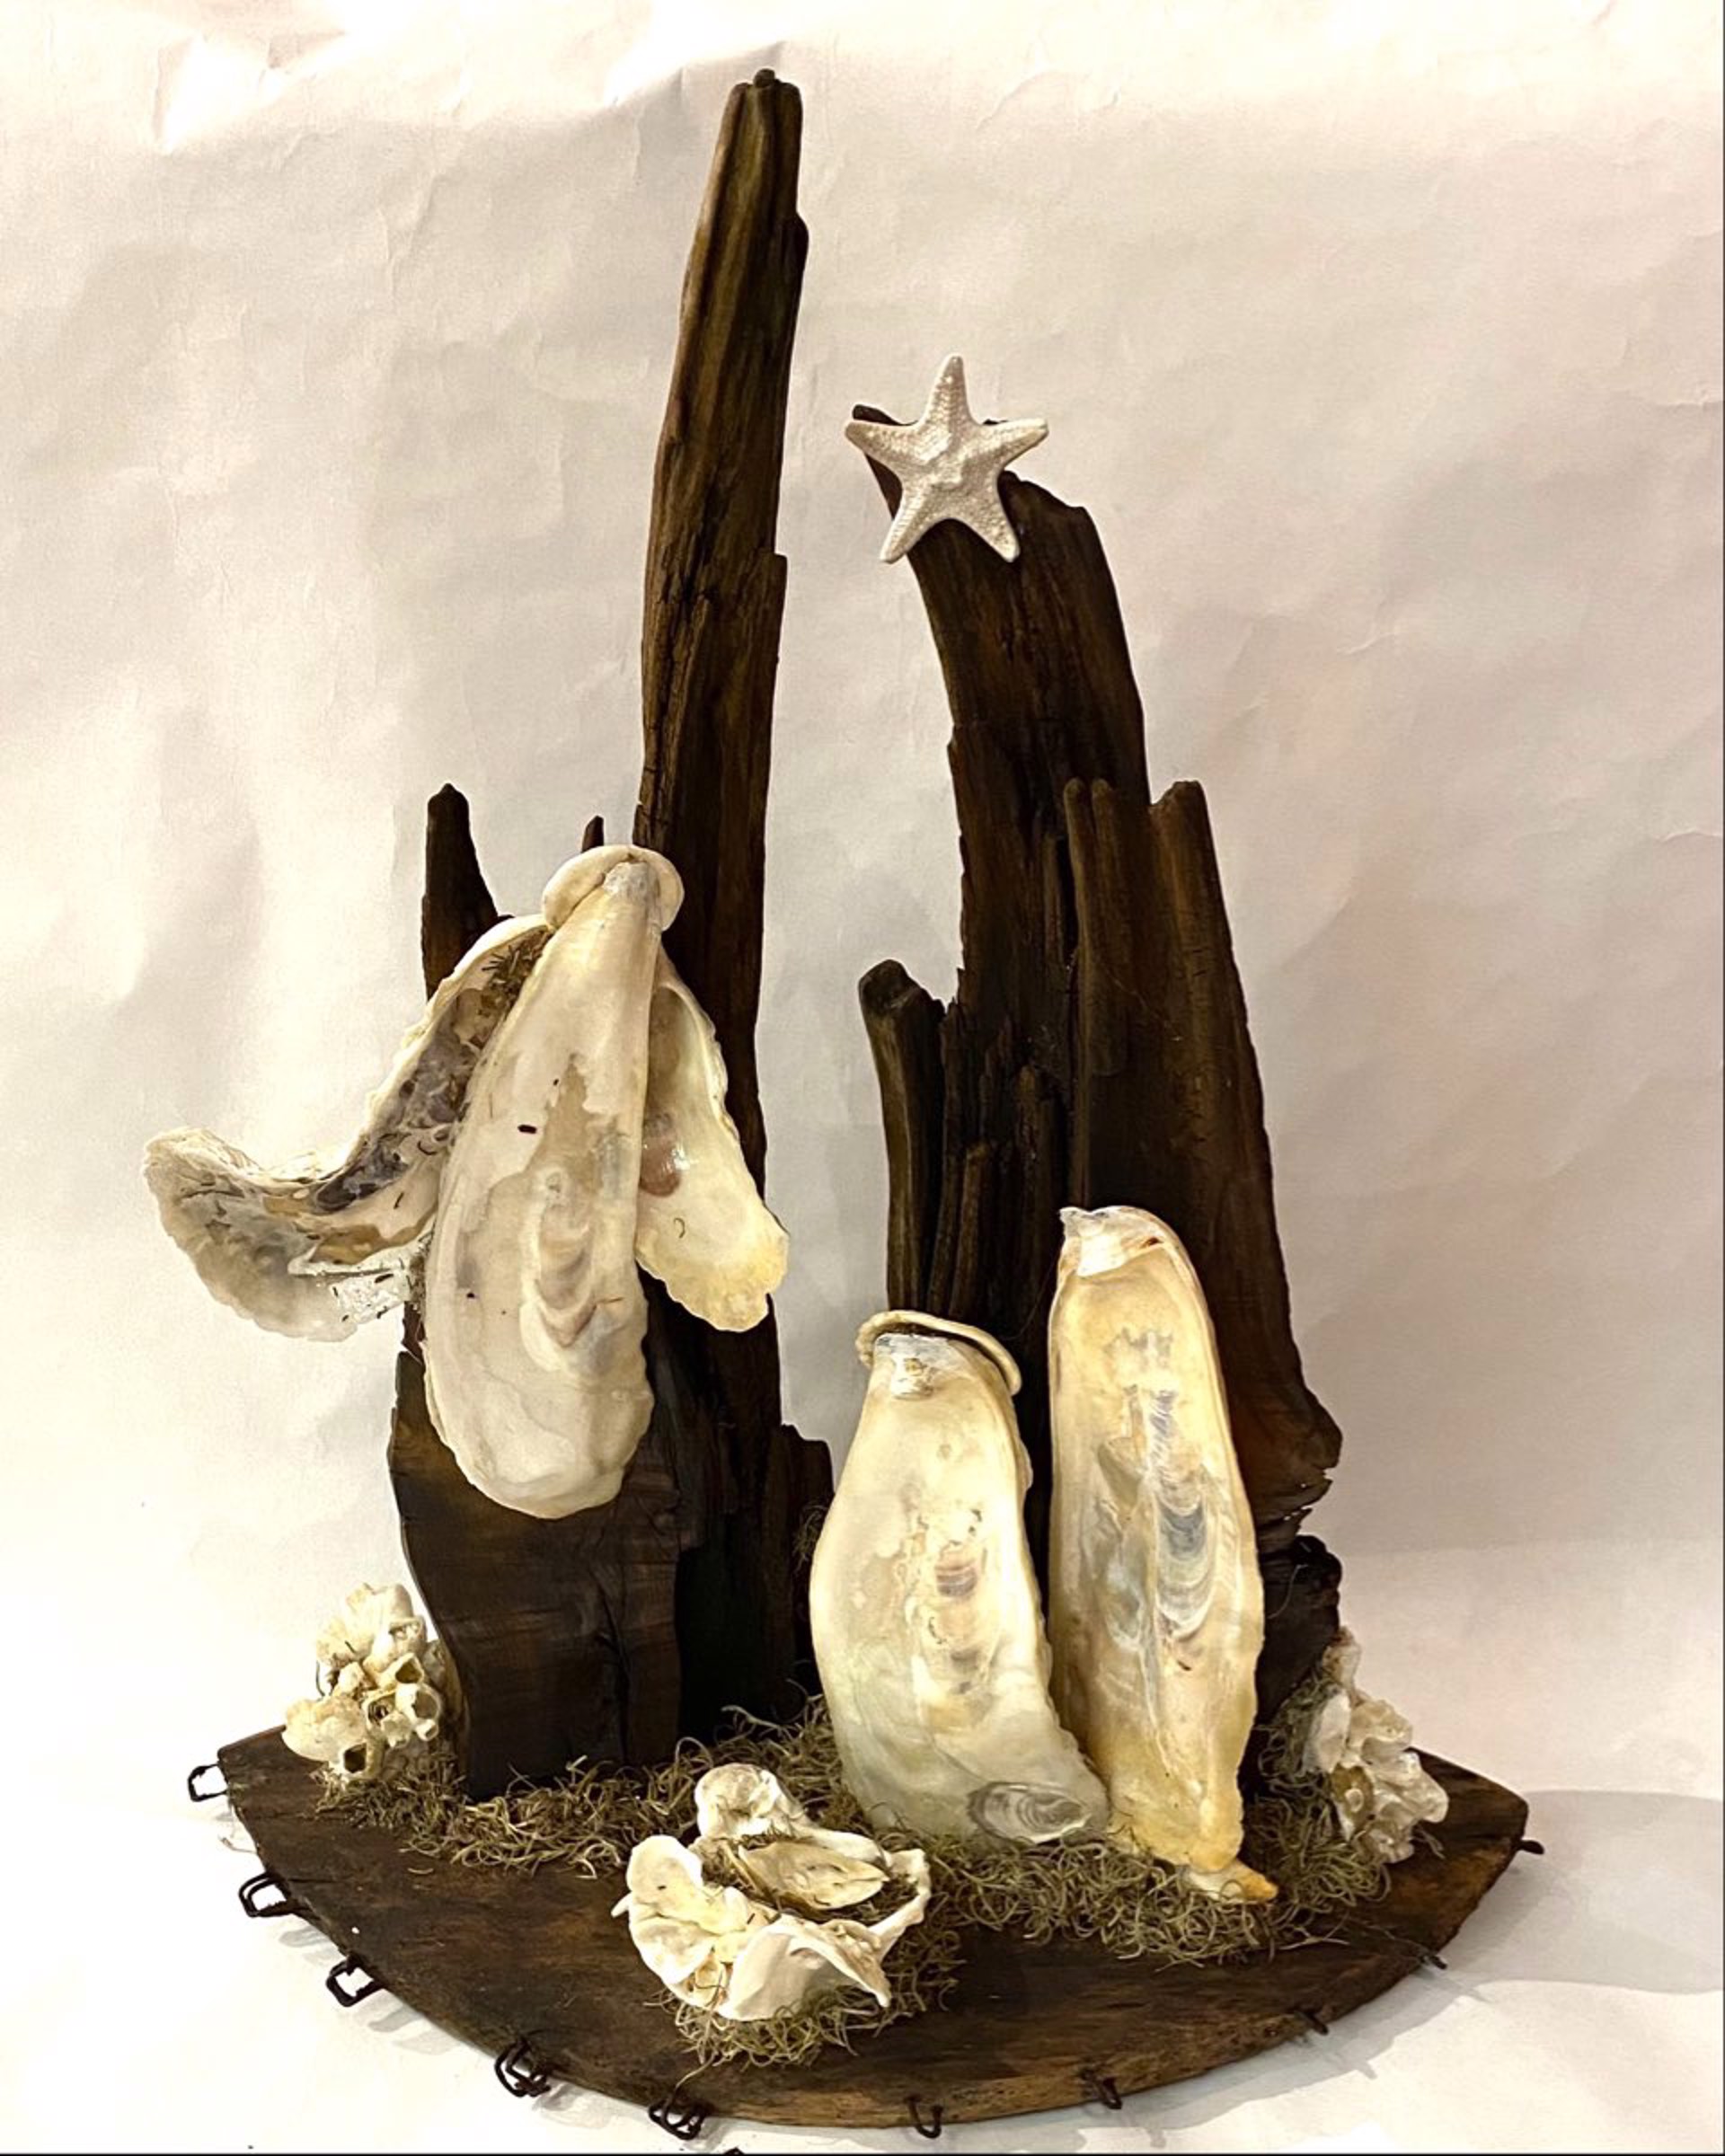 CN22-45  Creche From The Sea -  Driftwood Stable on Vintage Crab Basket Base by Chris Nietert